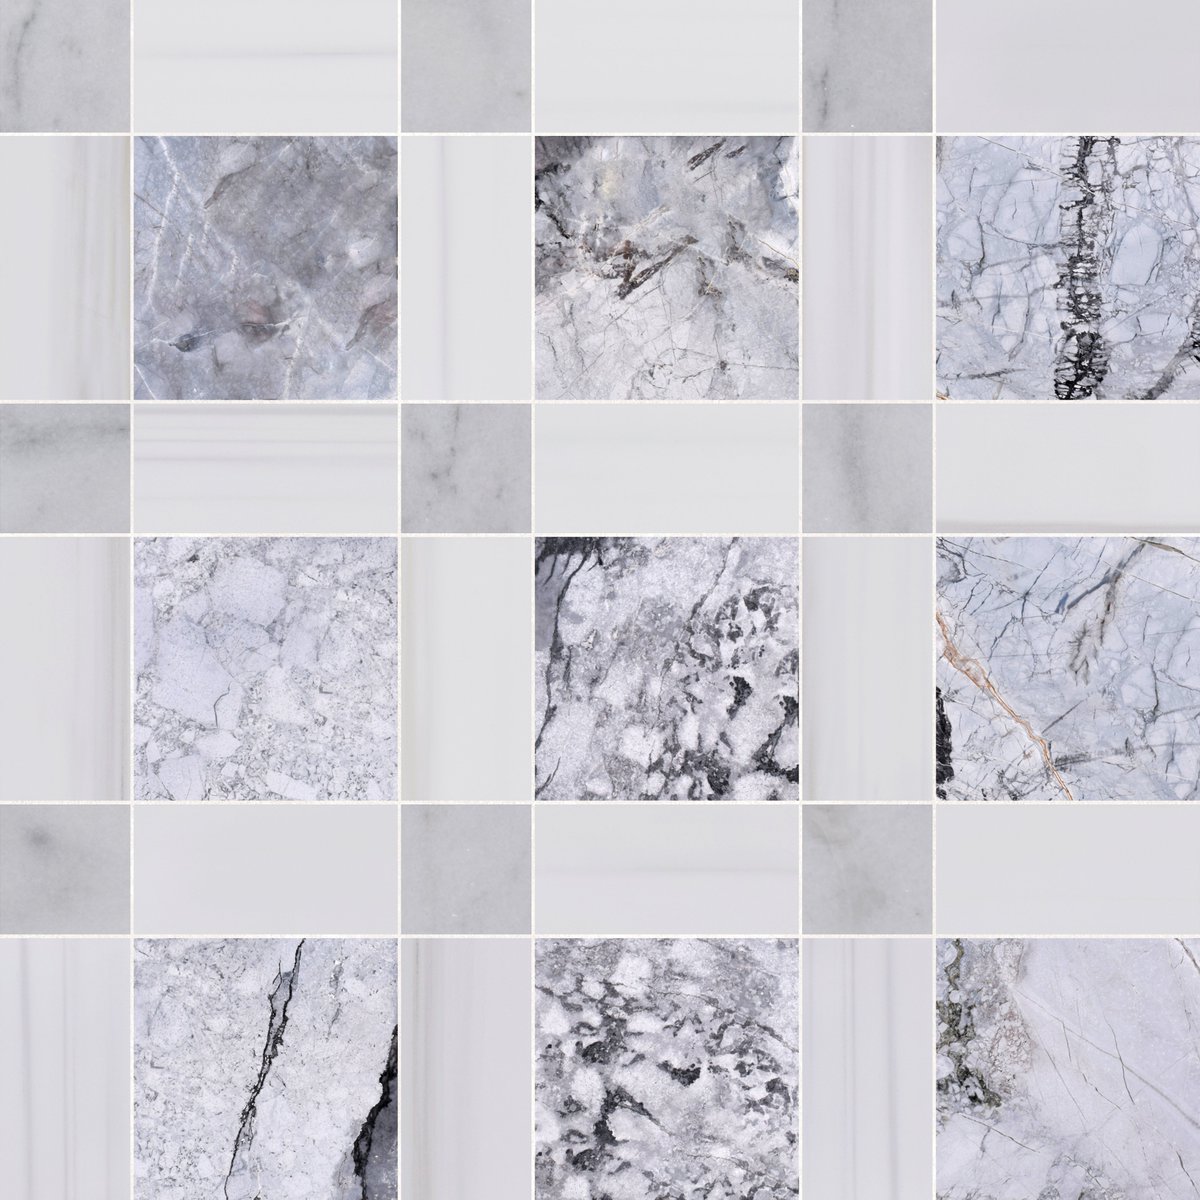 Waymouth Blue, one of most recent additions to our Victorian Collection.
ionicstone.com/global/product… 

#blue #invisible #victorian #collection #choosenaturalstone #stonecollection #marblebathroom #designer #designers #design #designcommunity #designerhome #architects #architecture